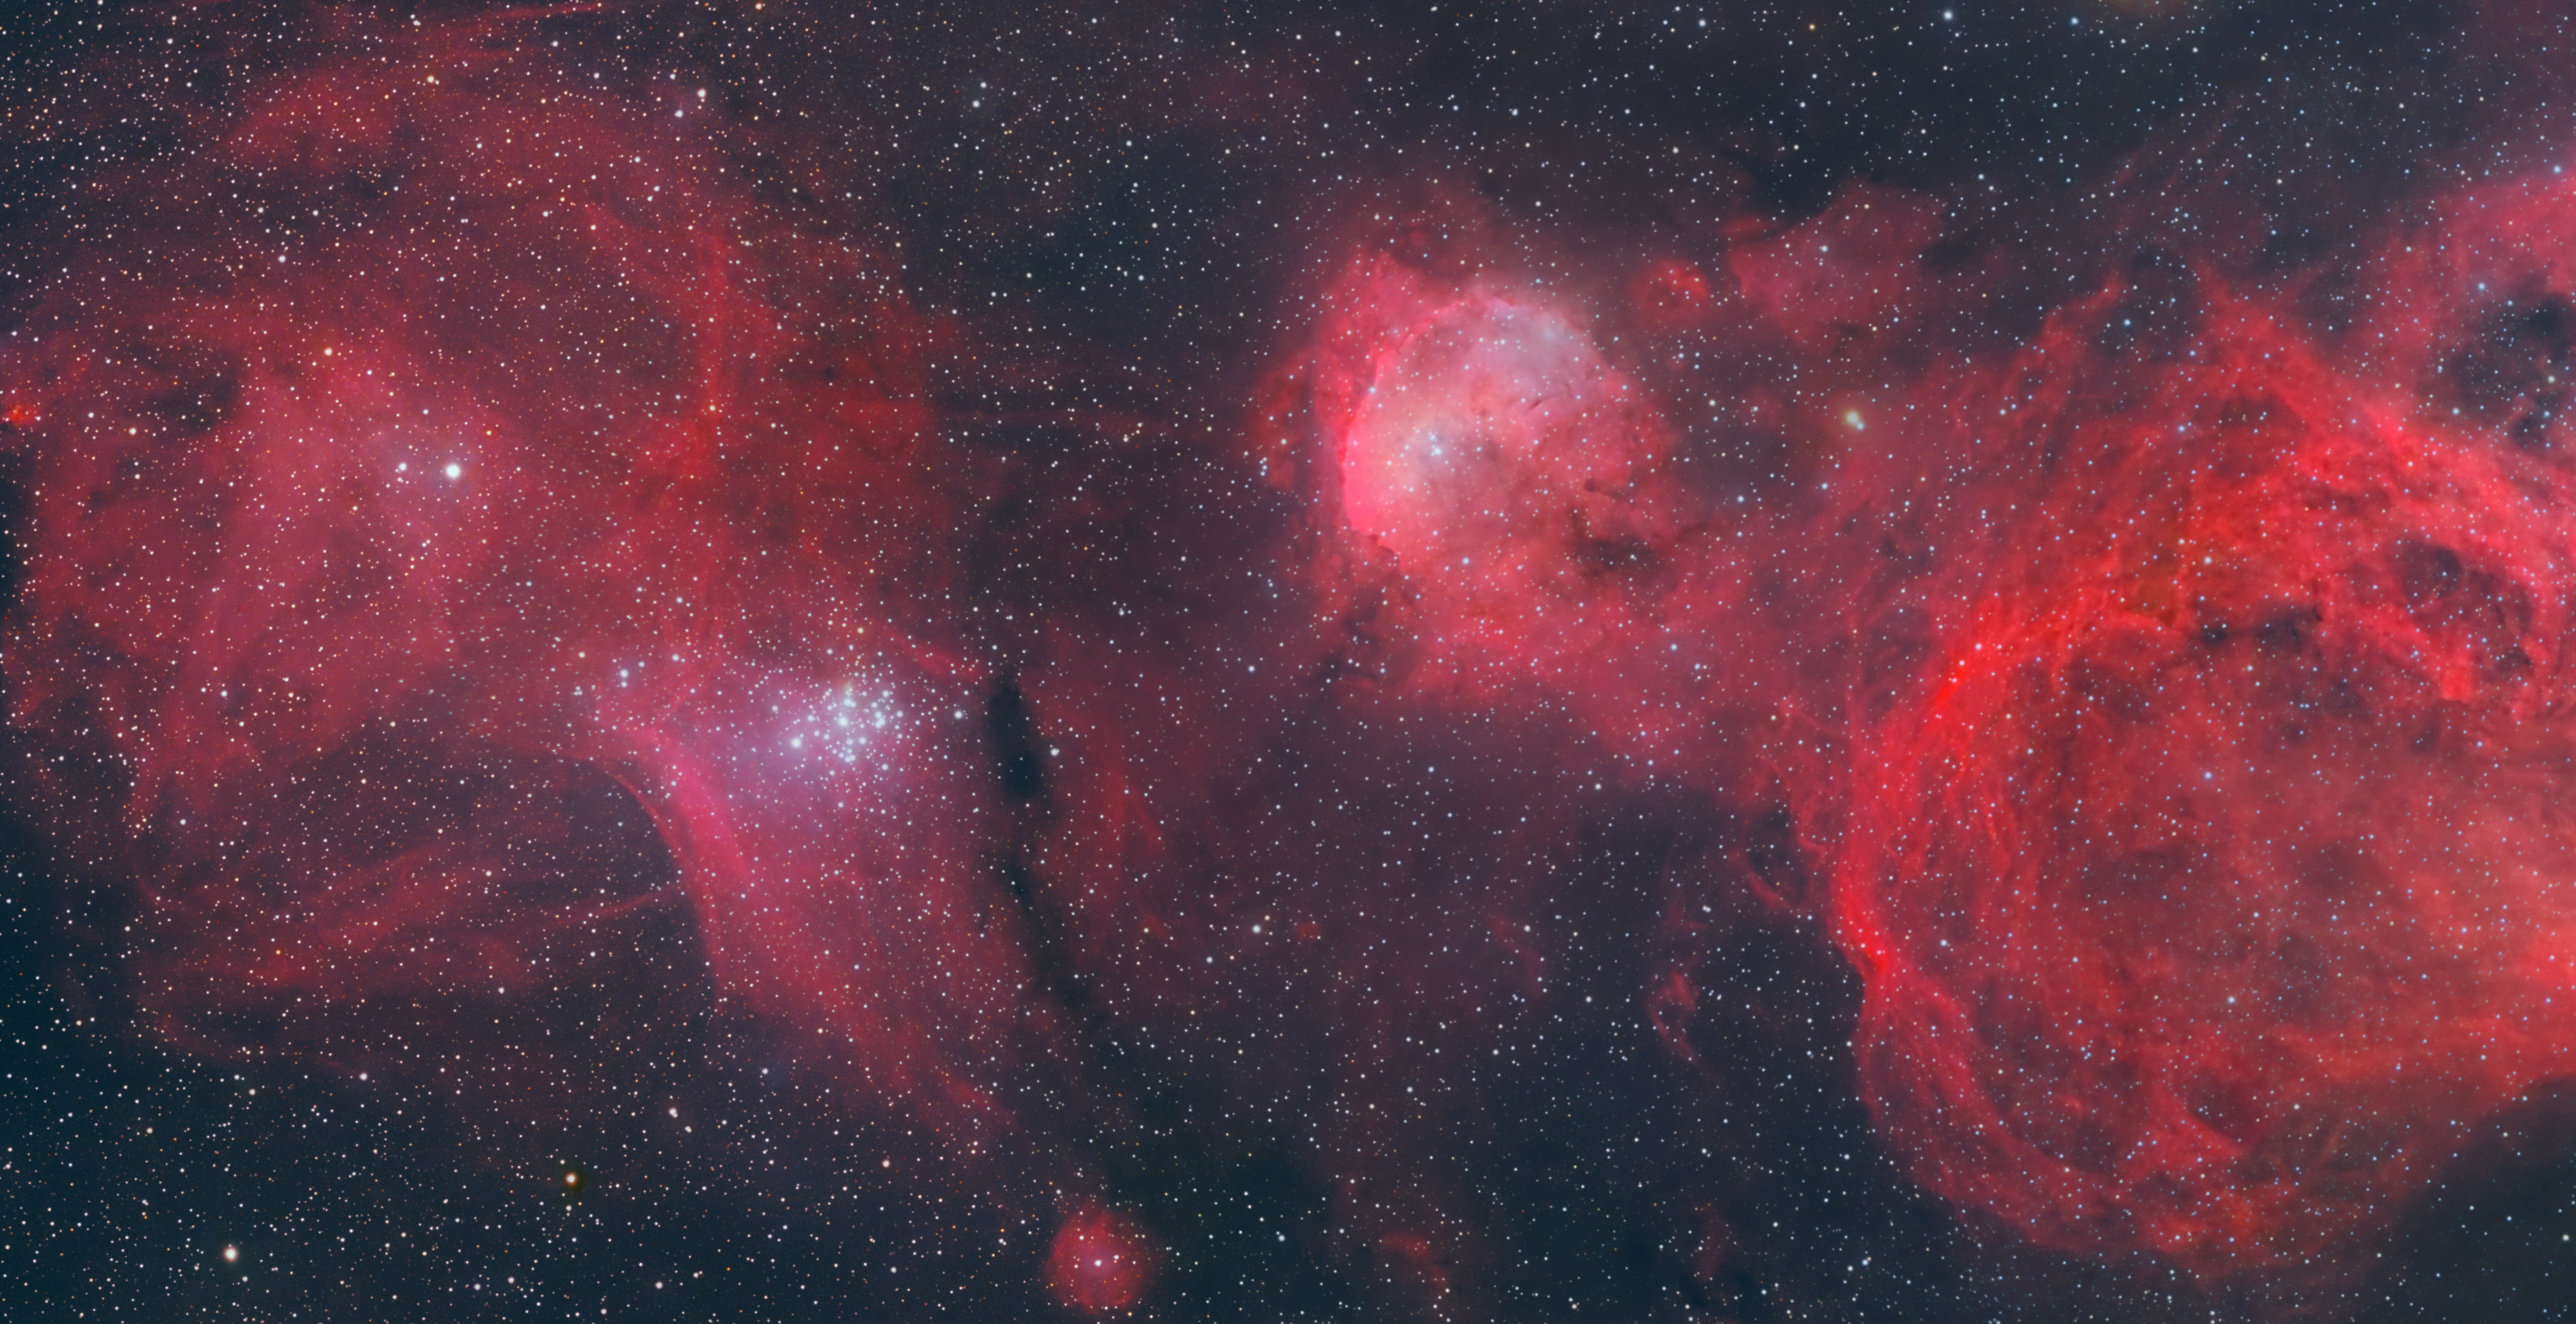 A long exposure image of the constellation of Carina.